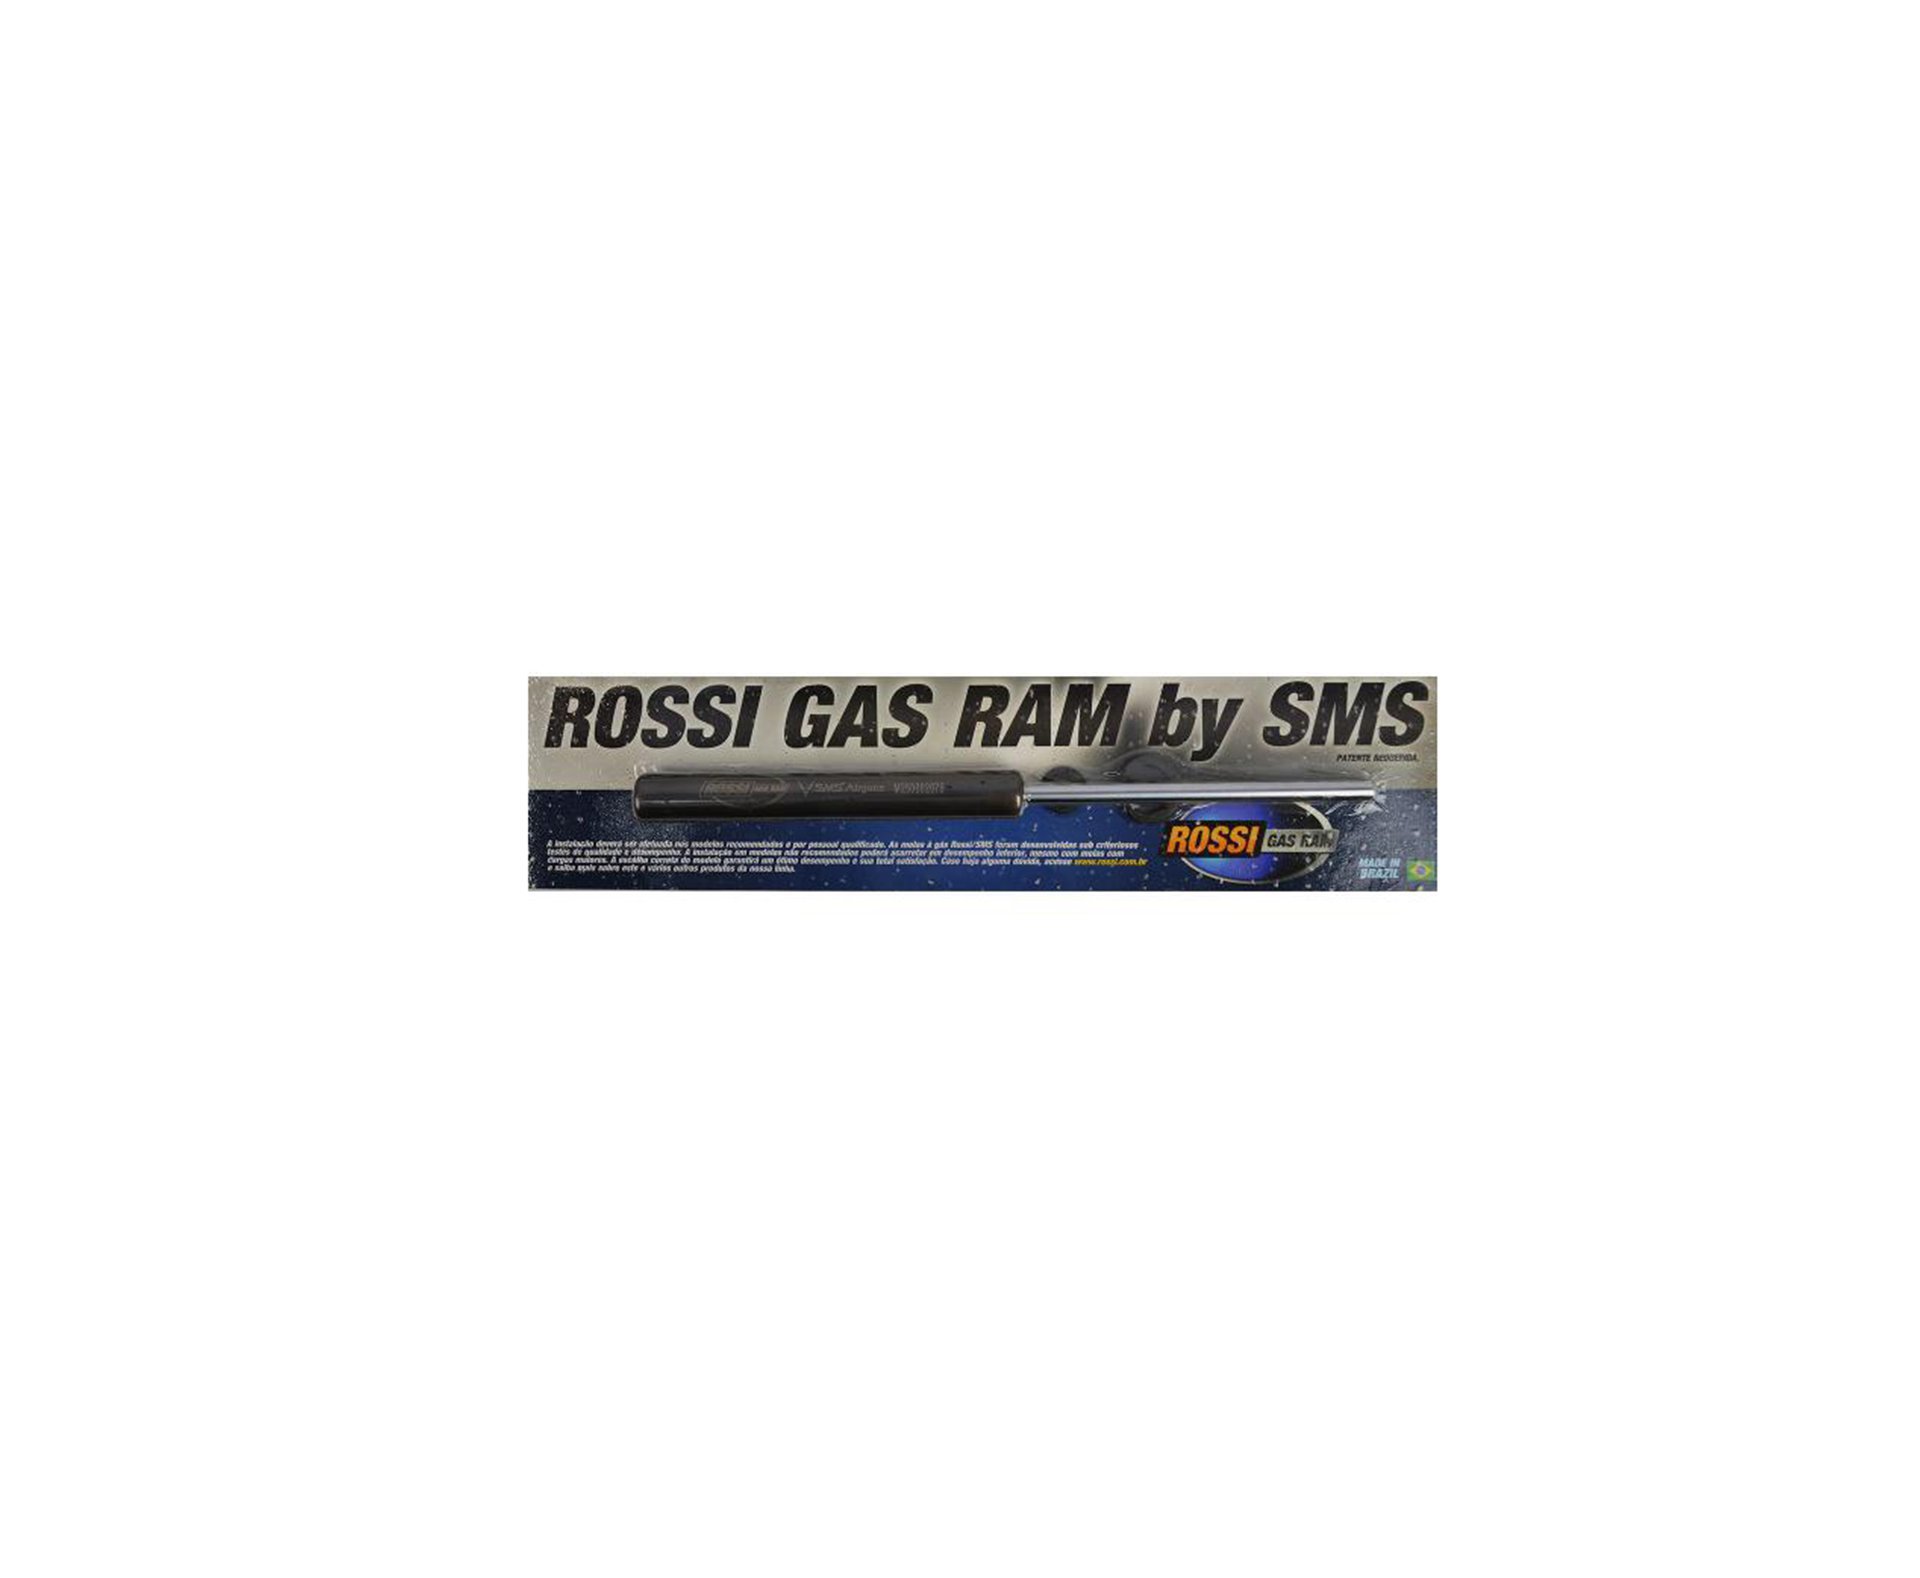 Mola Gás Ram Rossi By Sms - 150